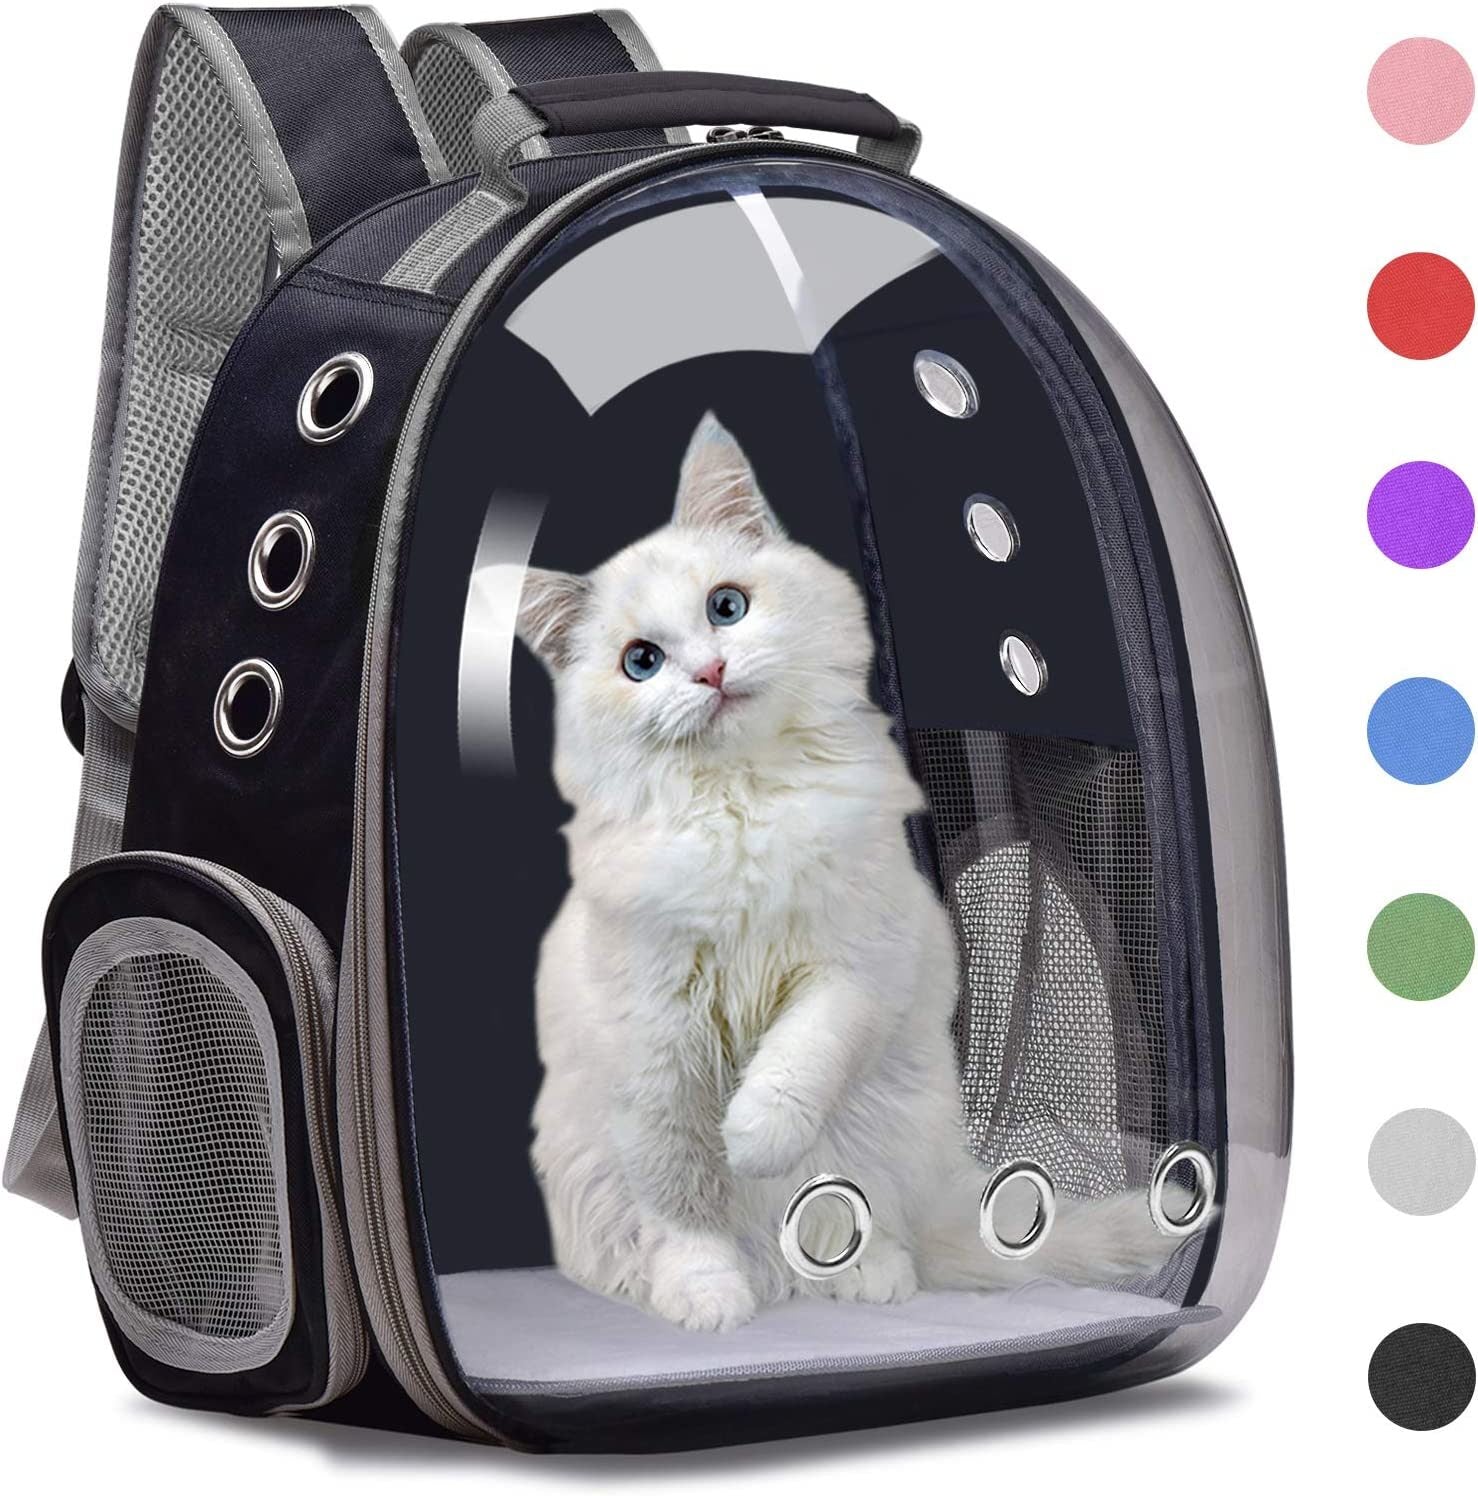 A white kitten inside a Space Capsule Pet Carrier Dog Hiking Backpack, looking out with a curious expression.